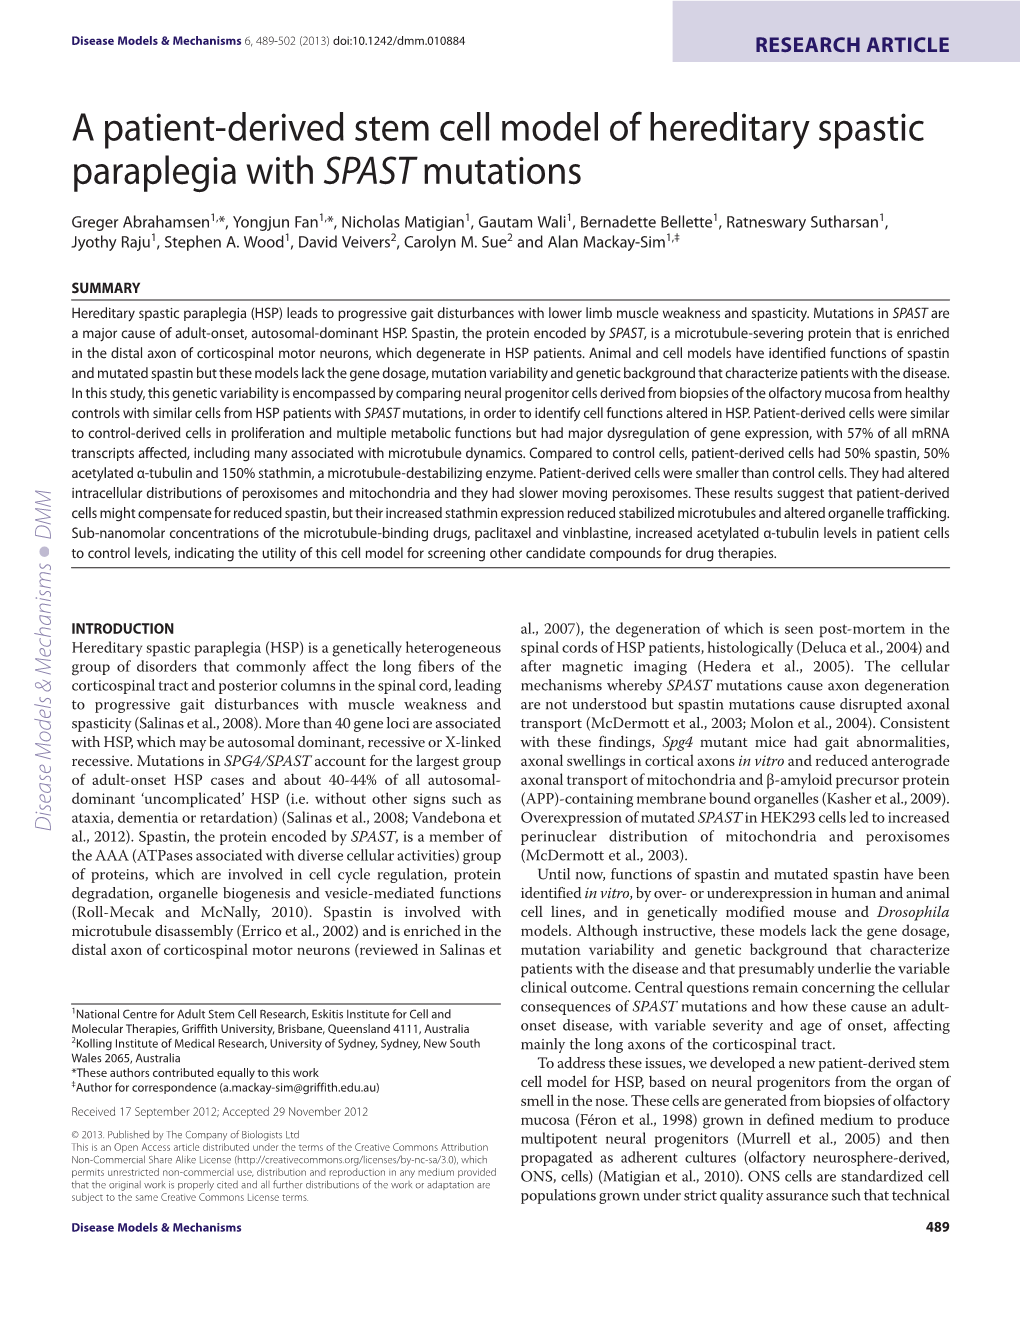 A Patient-Derived Stem Cell Model of Hereditary Spastic Paraplegia with SPAST Mutations